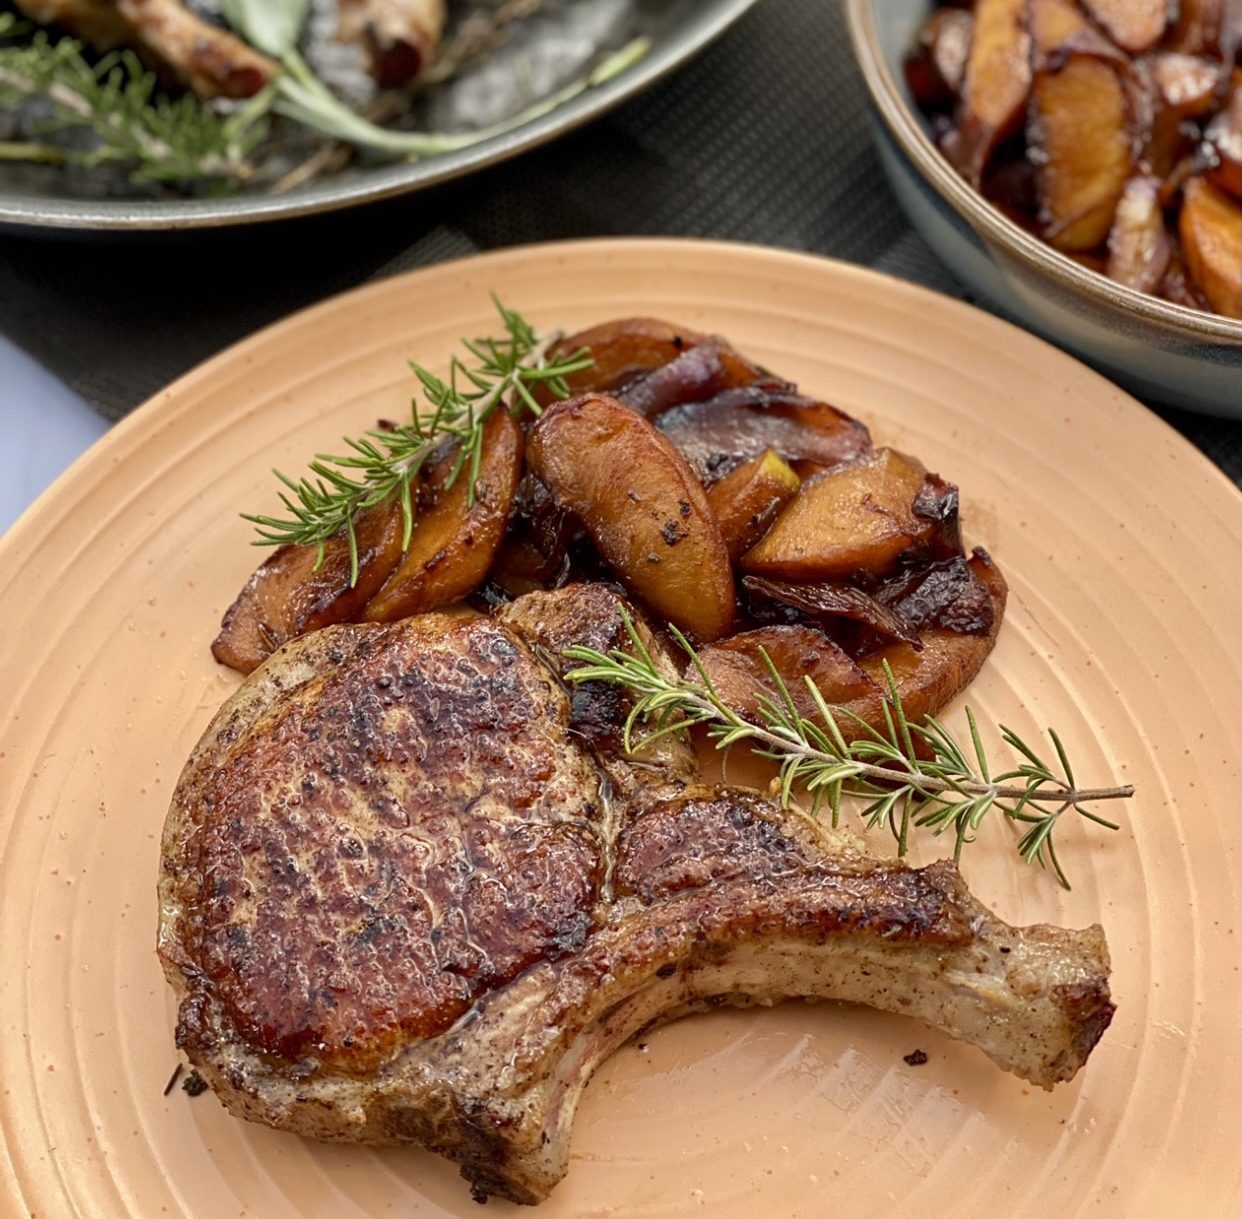 Pork Chops with Apples